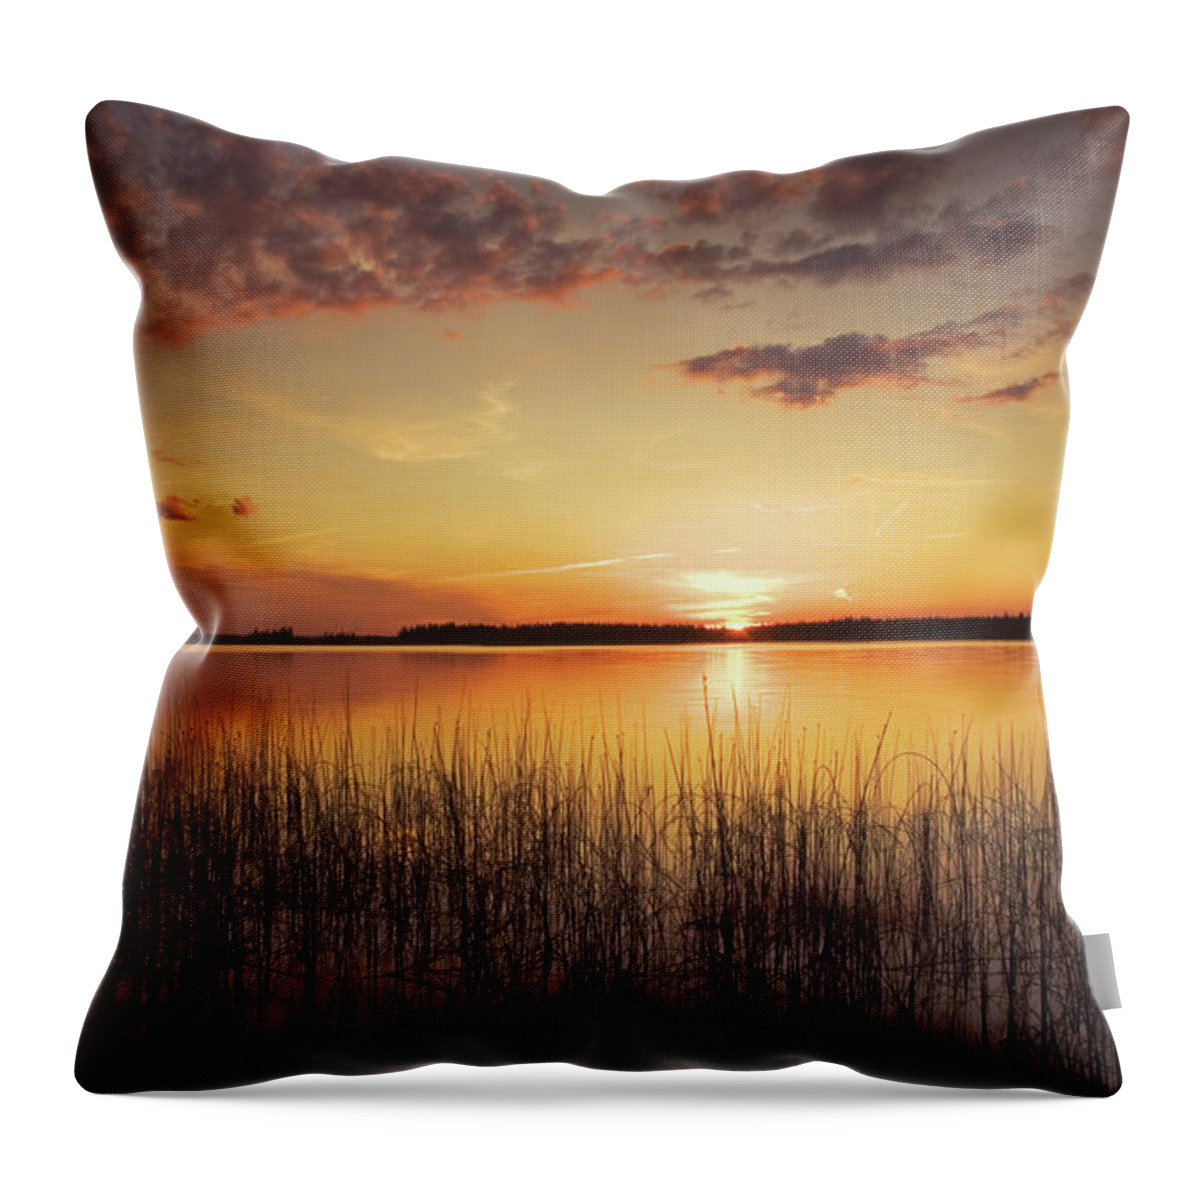 Tranquility Throw Pillow featuring the photograph Sunset On A Lake by Philippe Widling / Design Pics